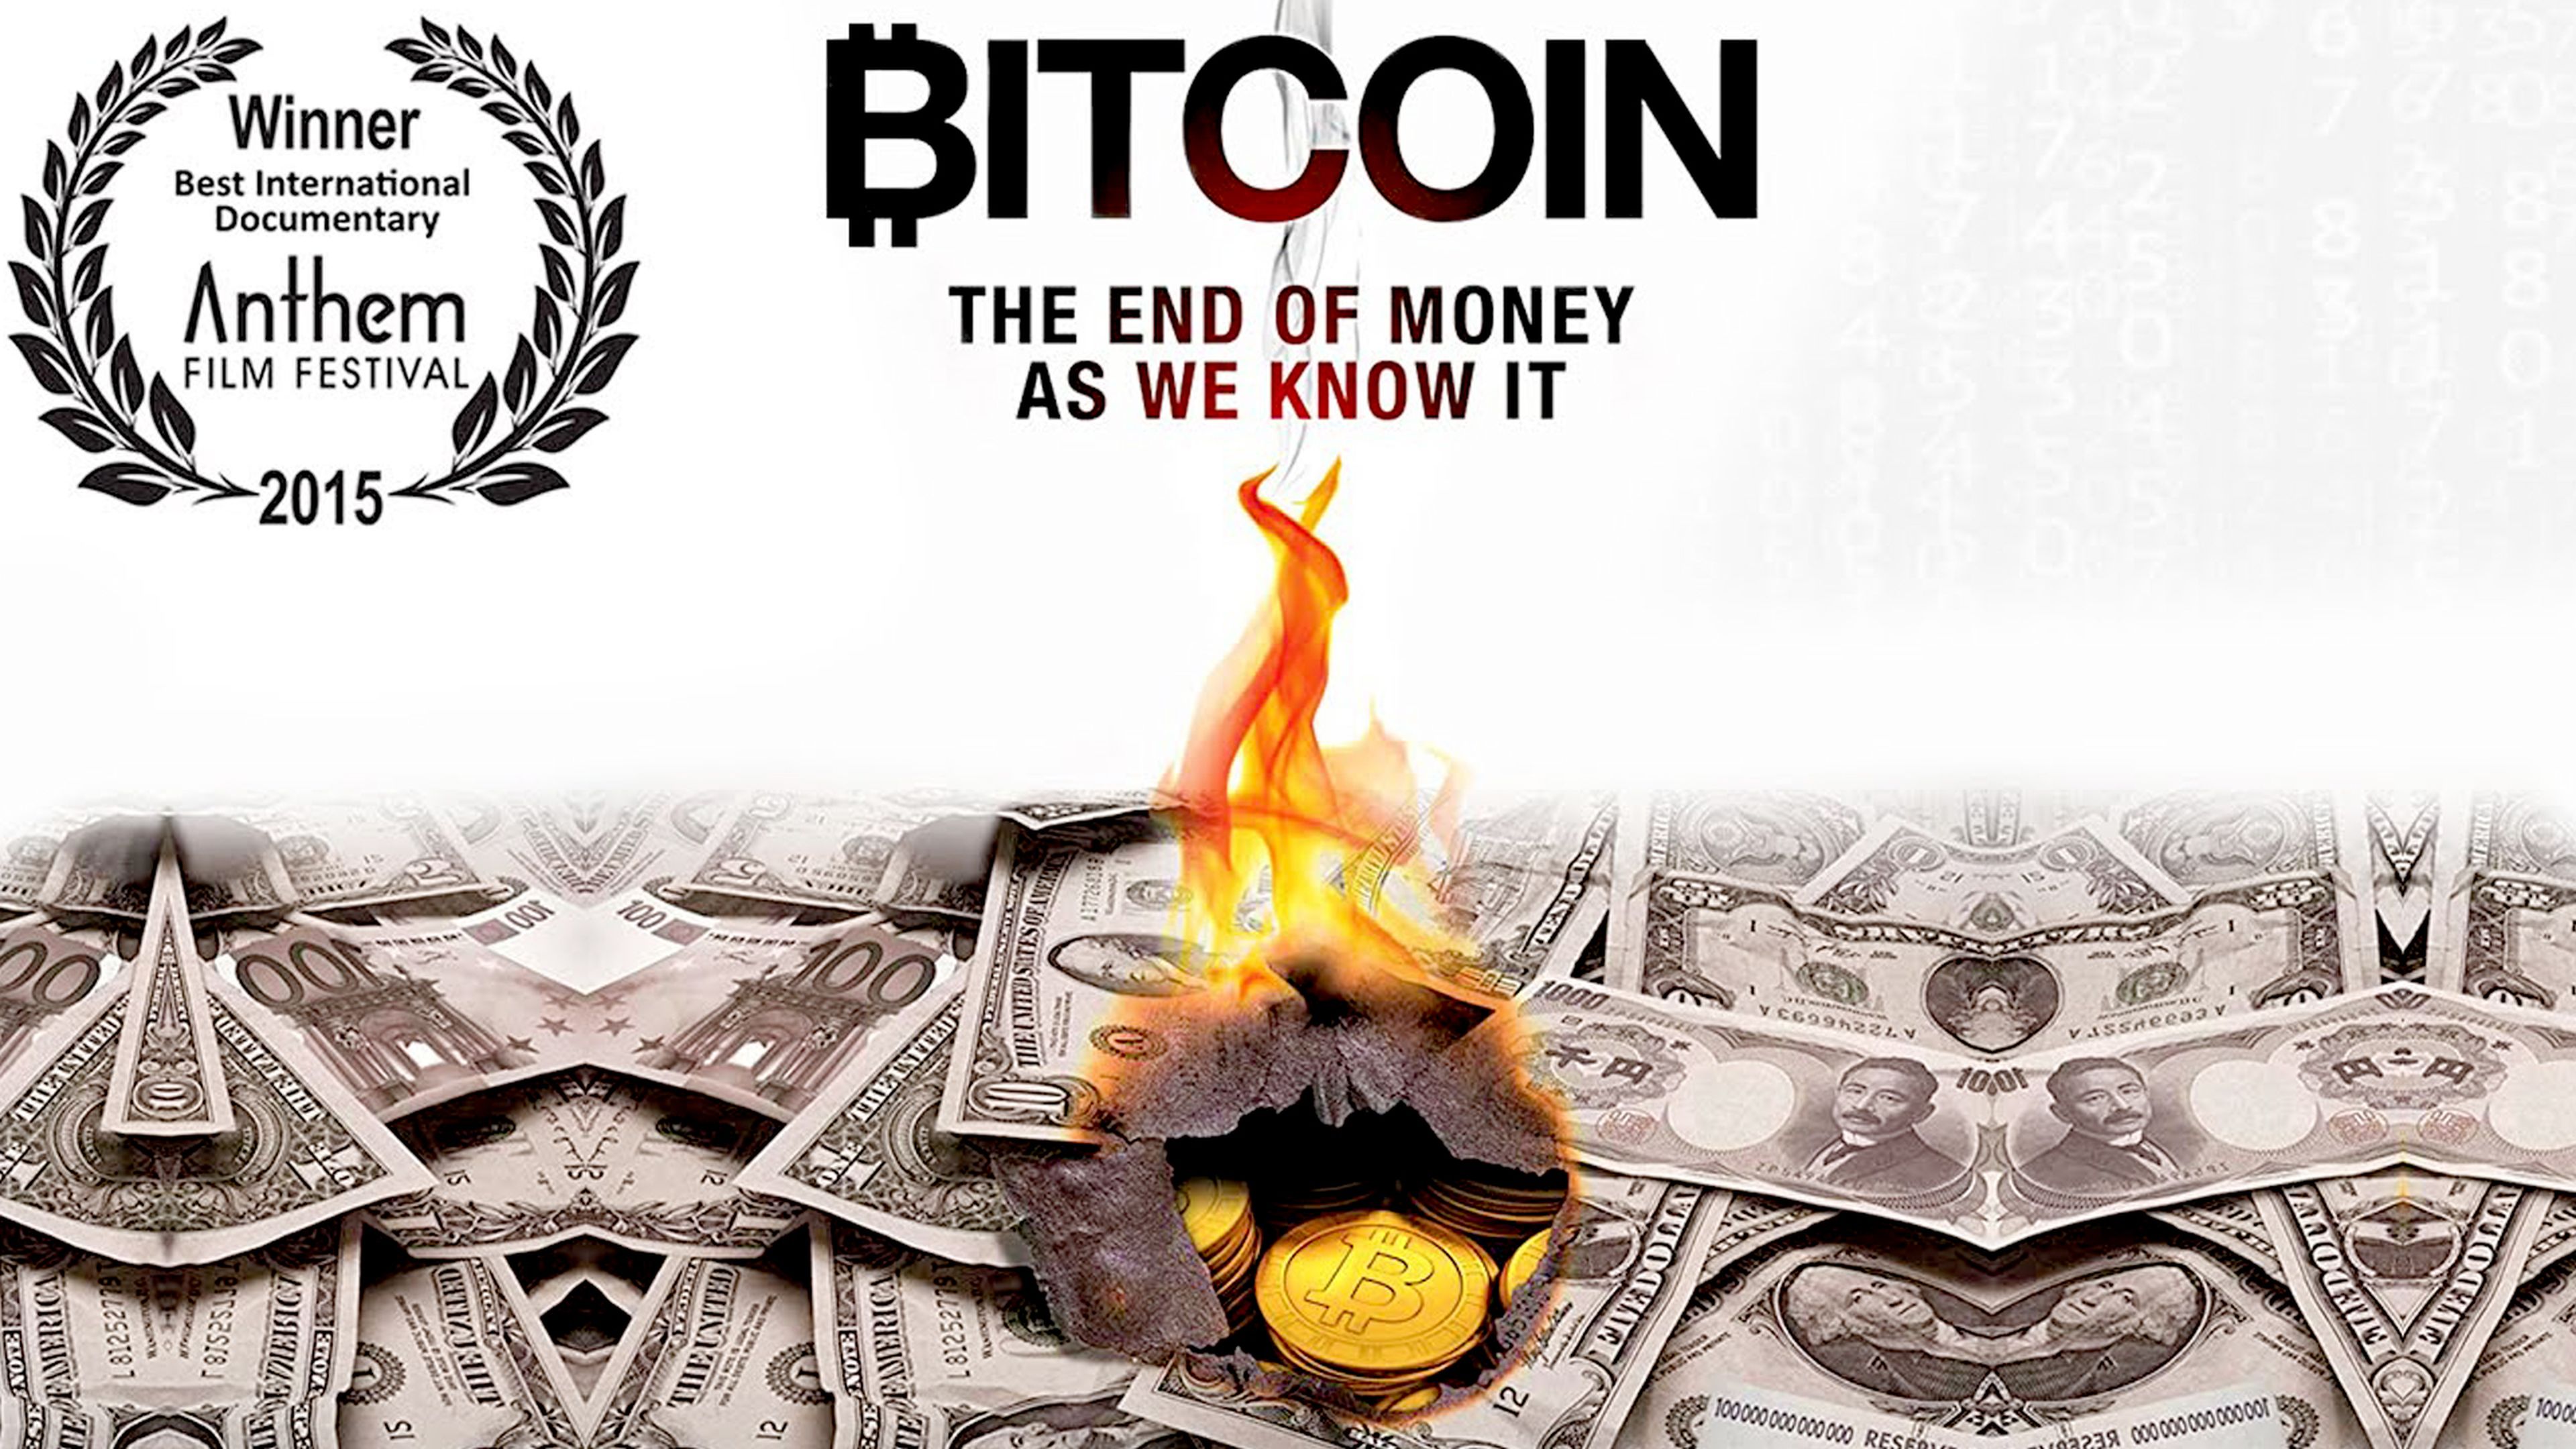 Bitcoin: The End of Money As We Know It